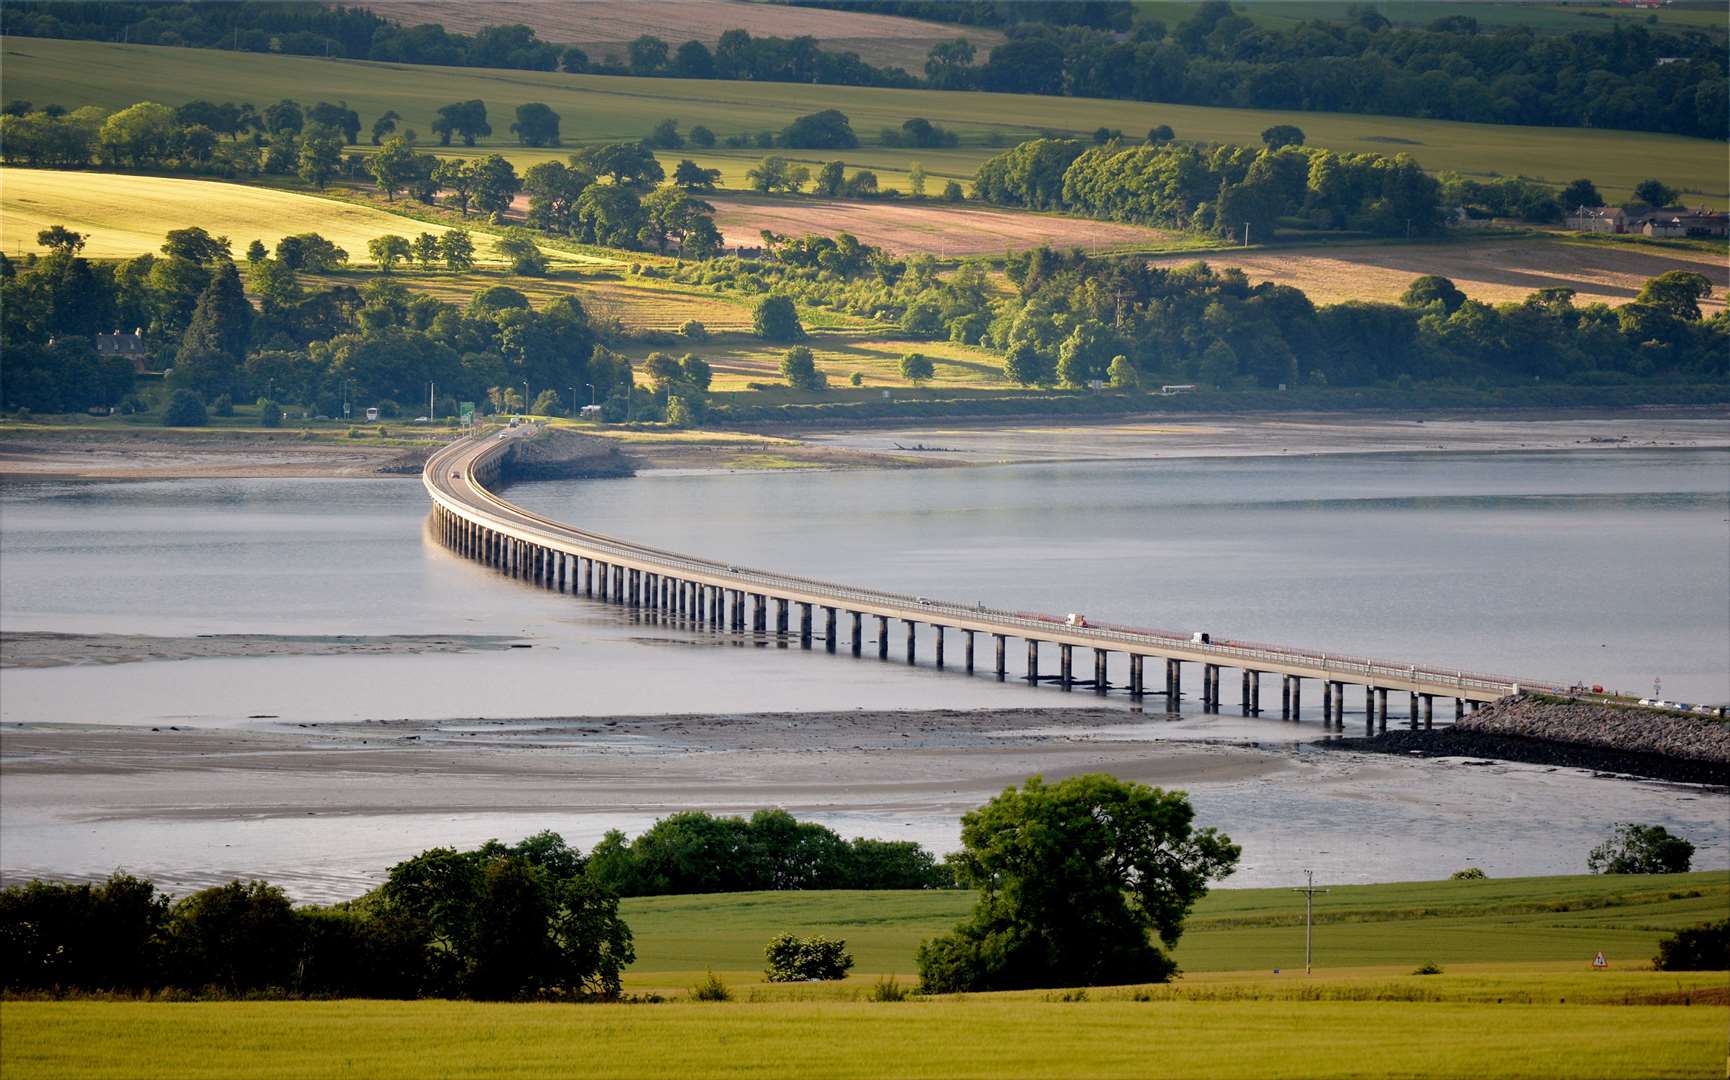 The roadworks will take place on the A9 immediately to the south of the Cromarty Bridge.